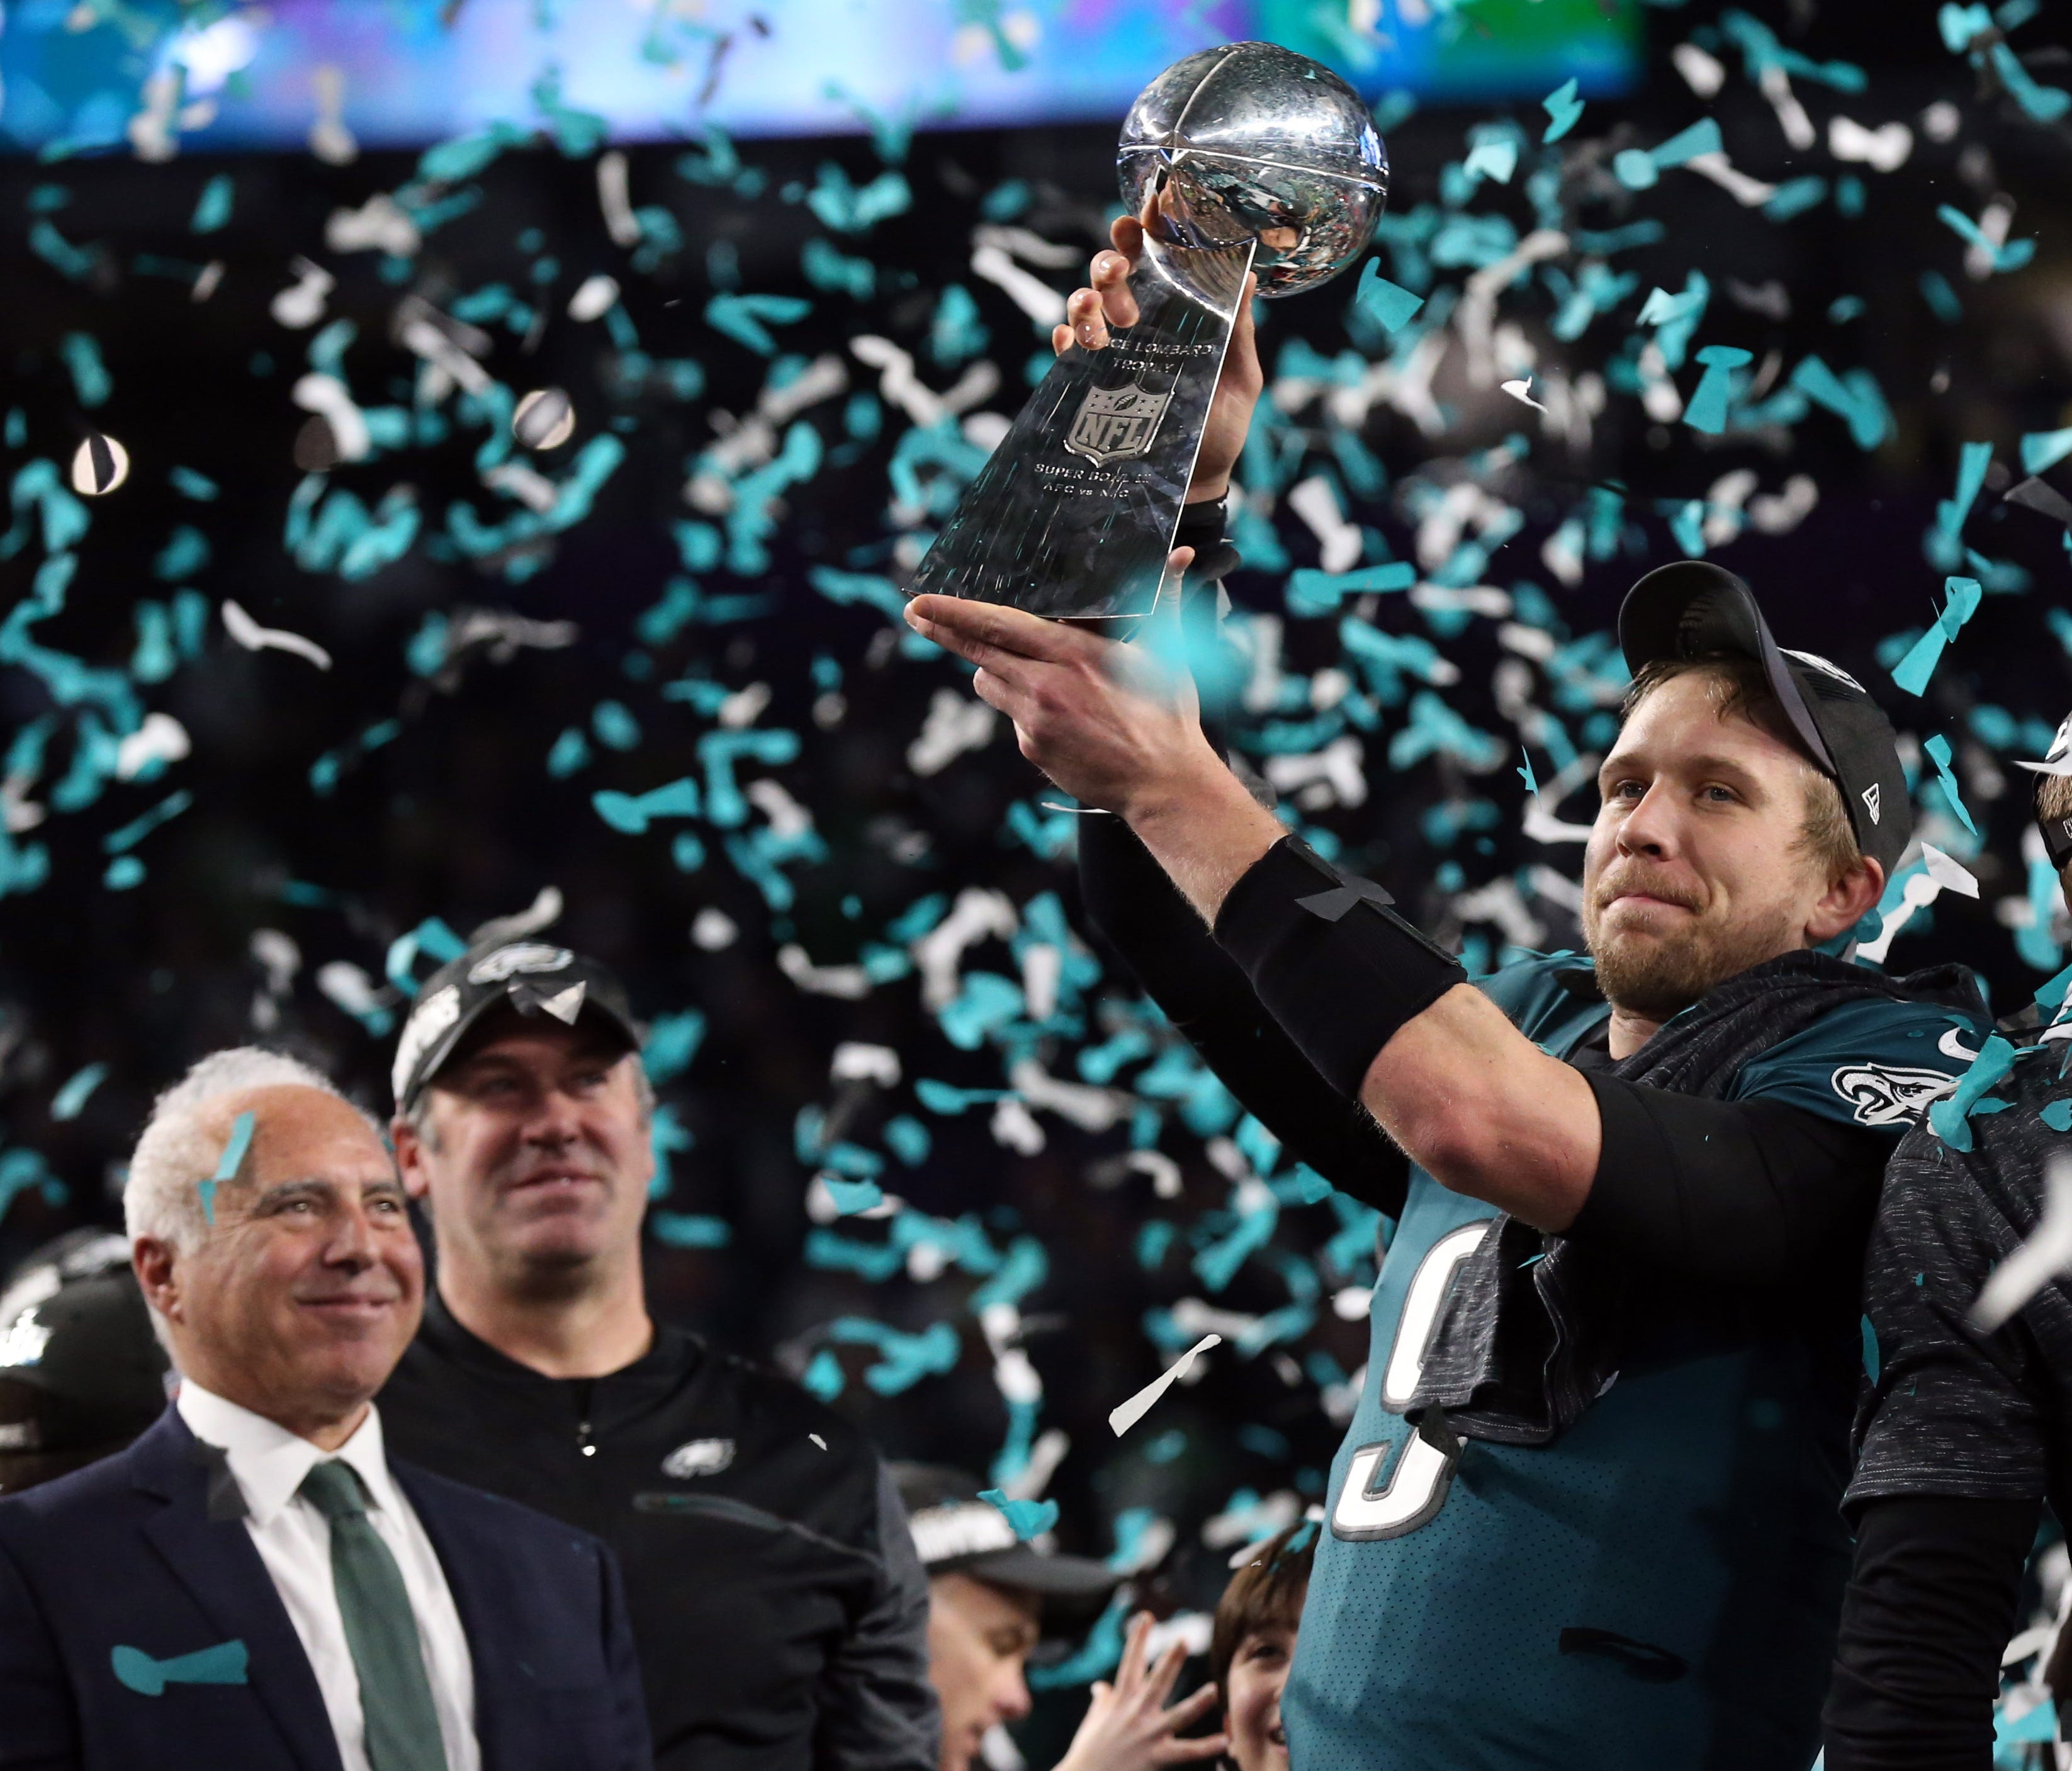 Philadelphia Eagles quarterback Nick Foles (9) celebrates with the Lombardi Trophy after defeating the New England Patriots 41-33 in Super Bowl LII at U.S. Bank Stadium.